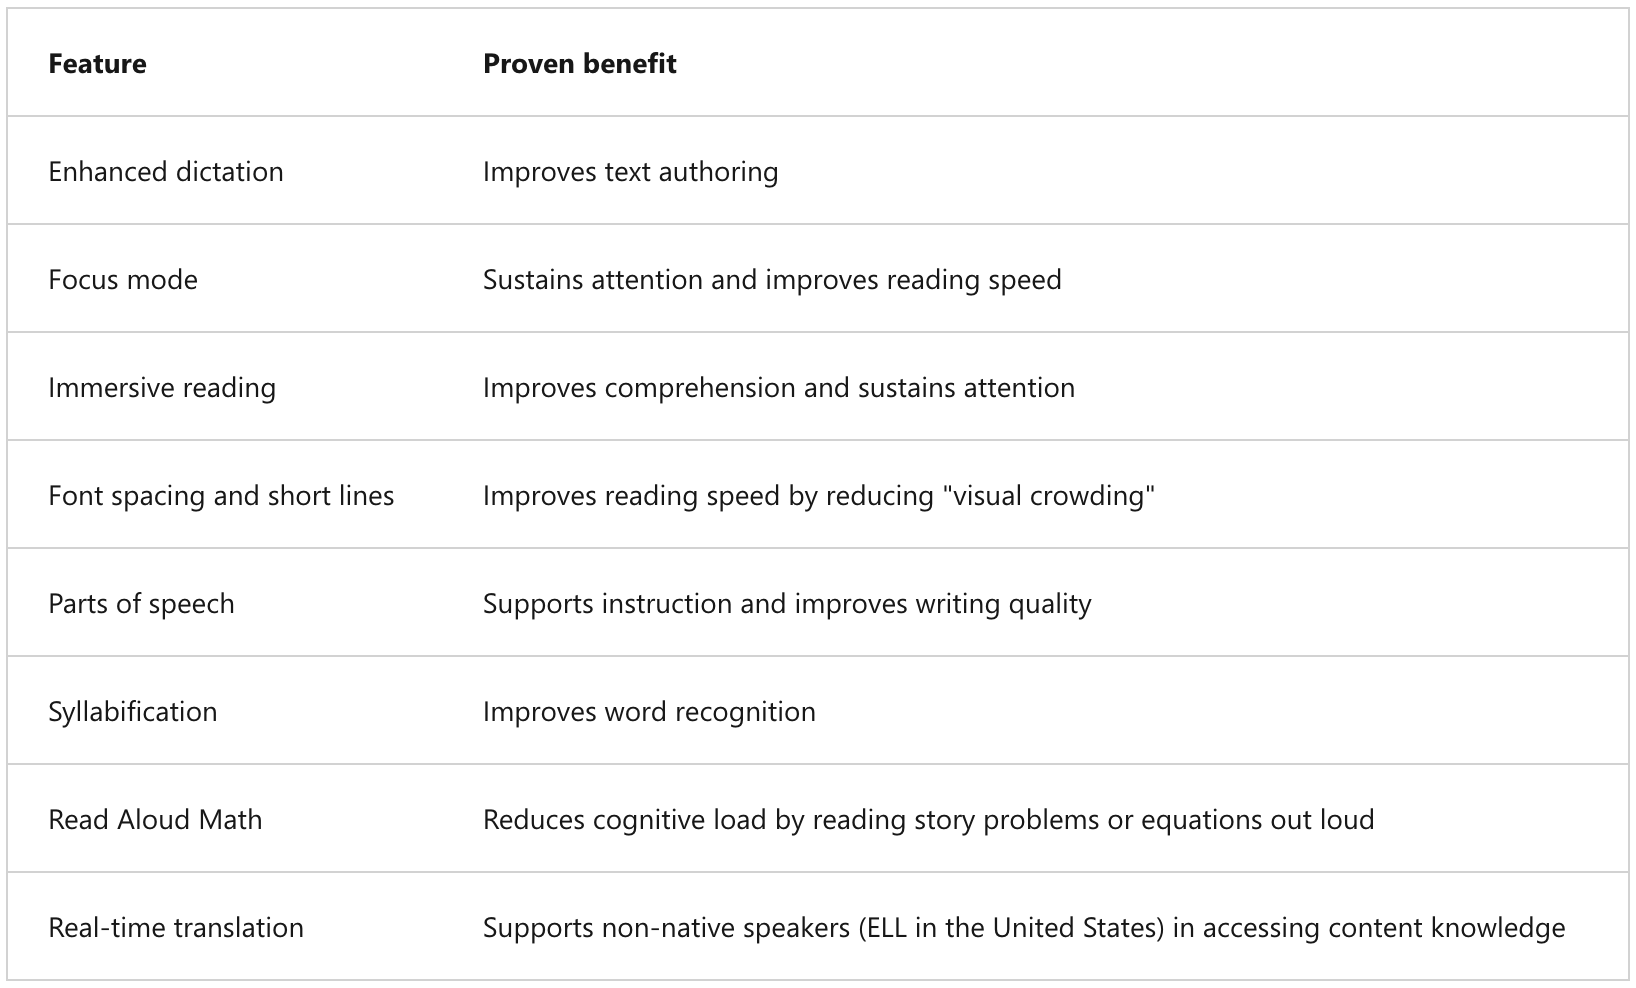 A table showing the benefits of immersive reader by Microsoft